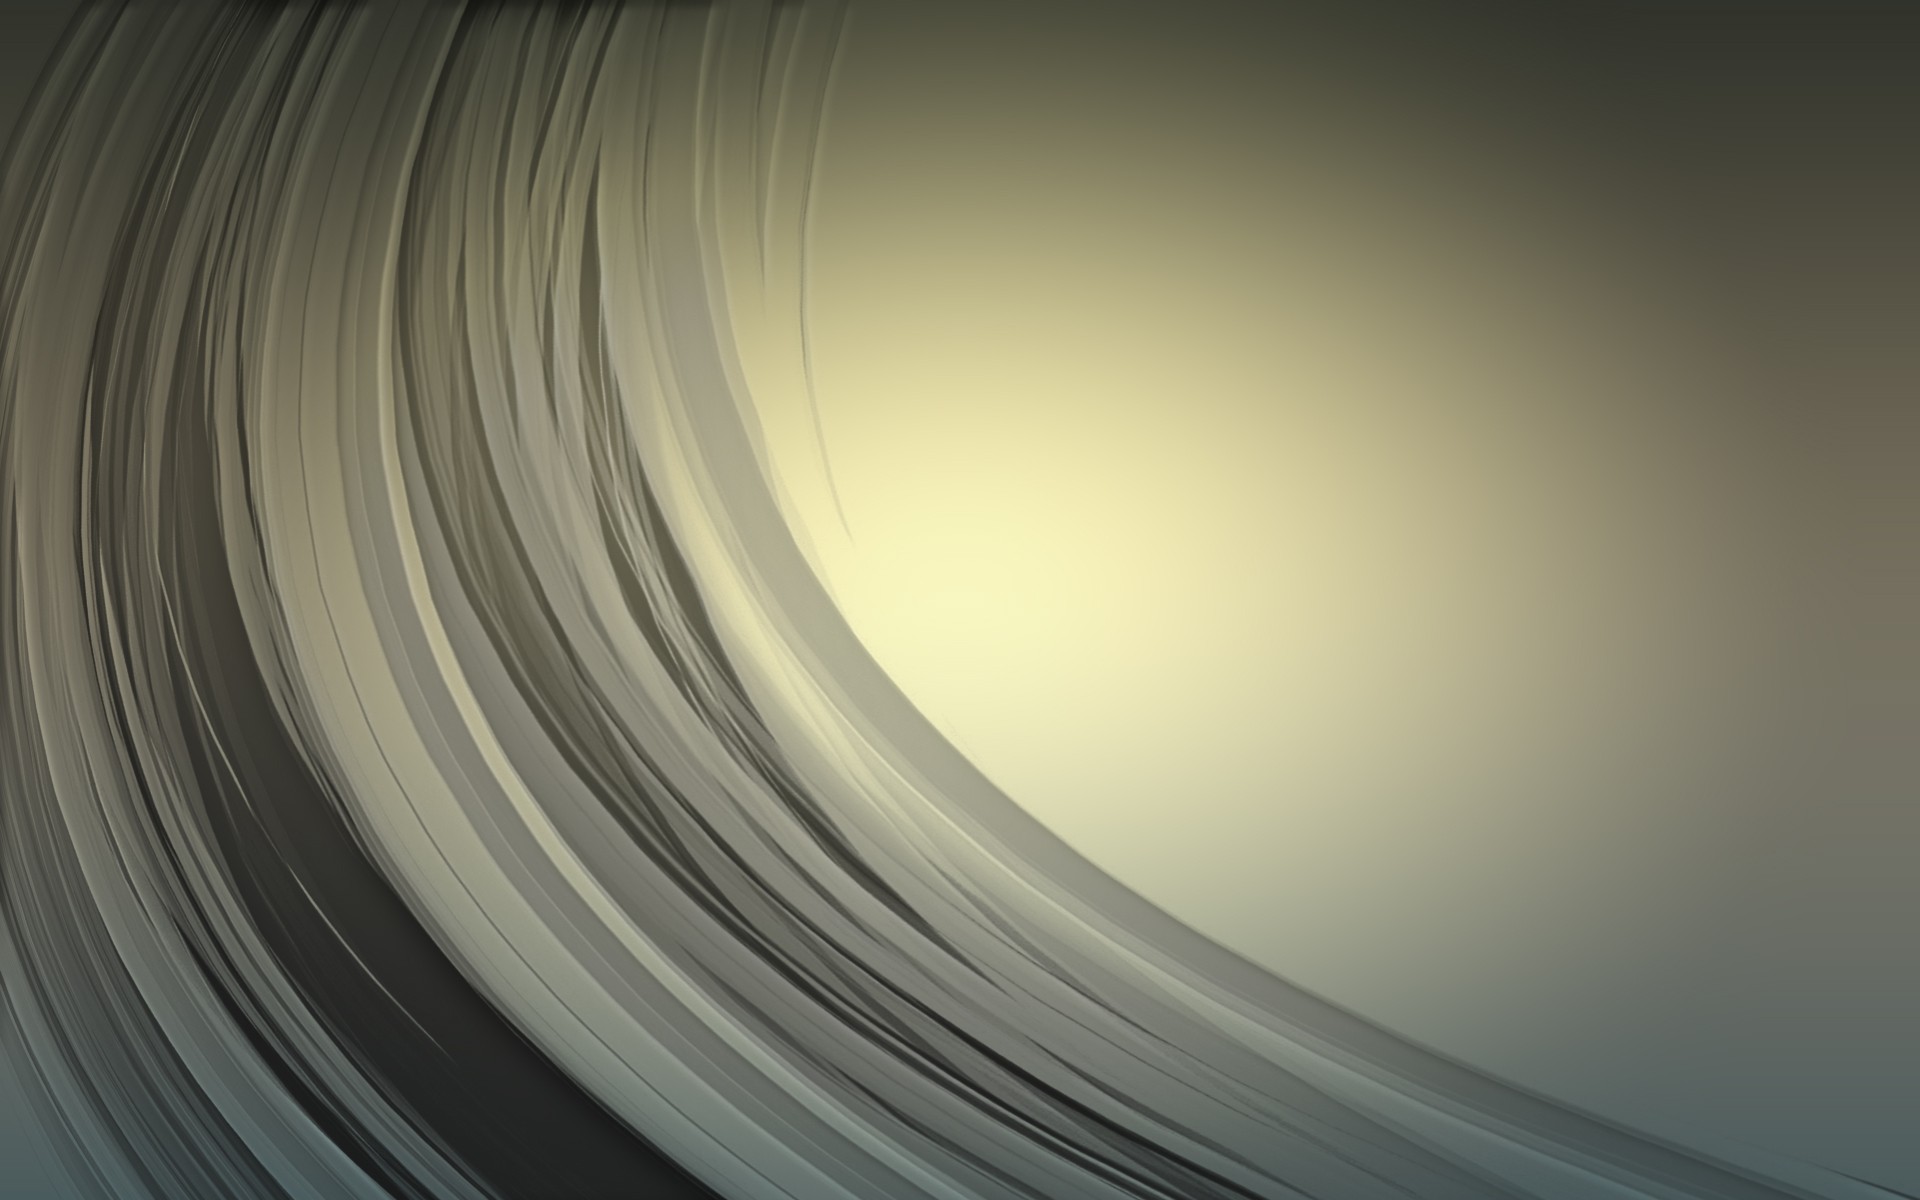 General 1920x1200 simple background minimalism abstract waveforms shapes